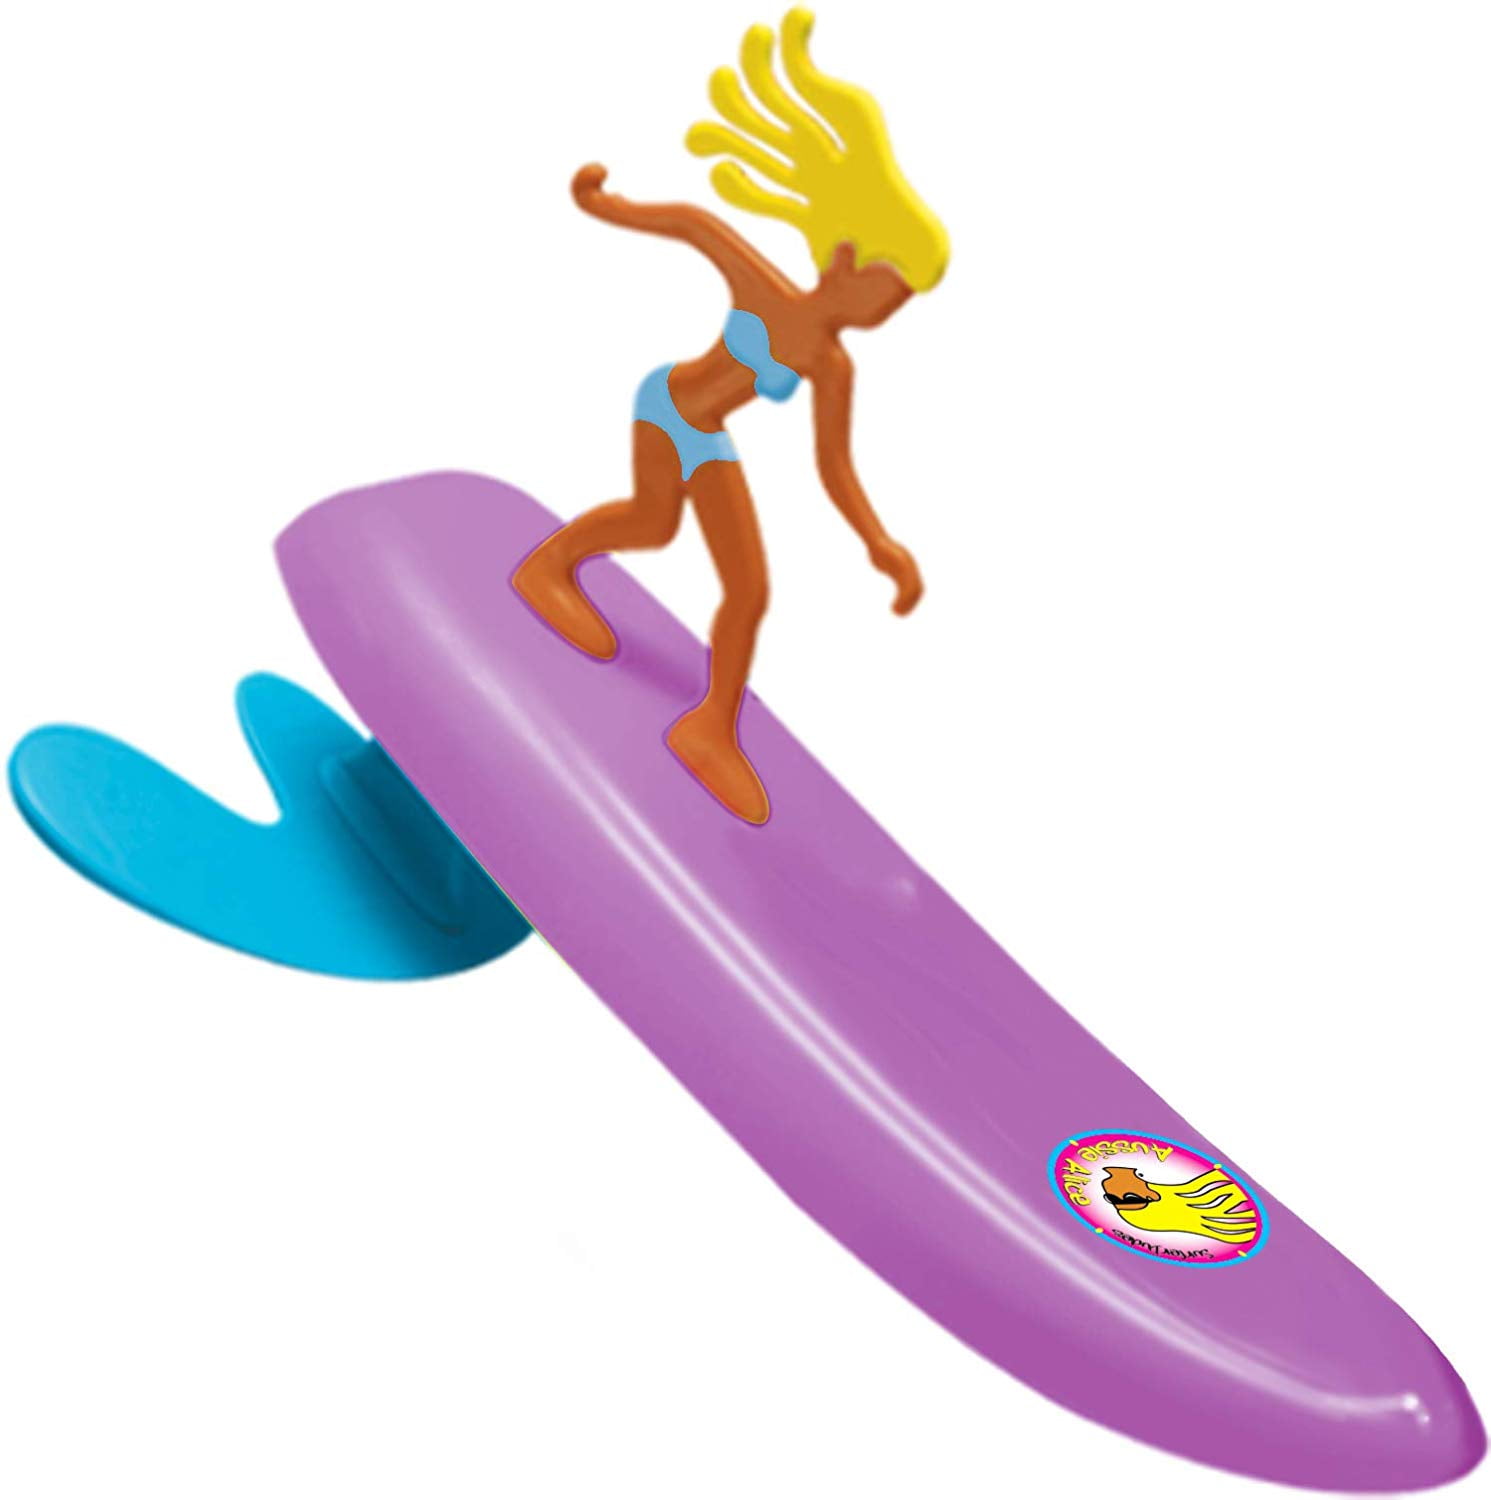 Bobbi and Alice Surfer Dudes Wave Powered Mini-Surfer and Surfboard Beach Toy 2 Pack 